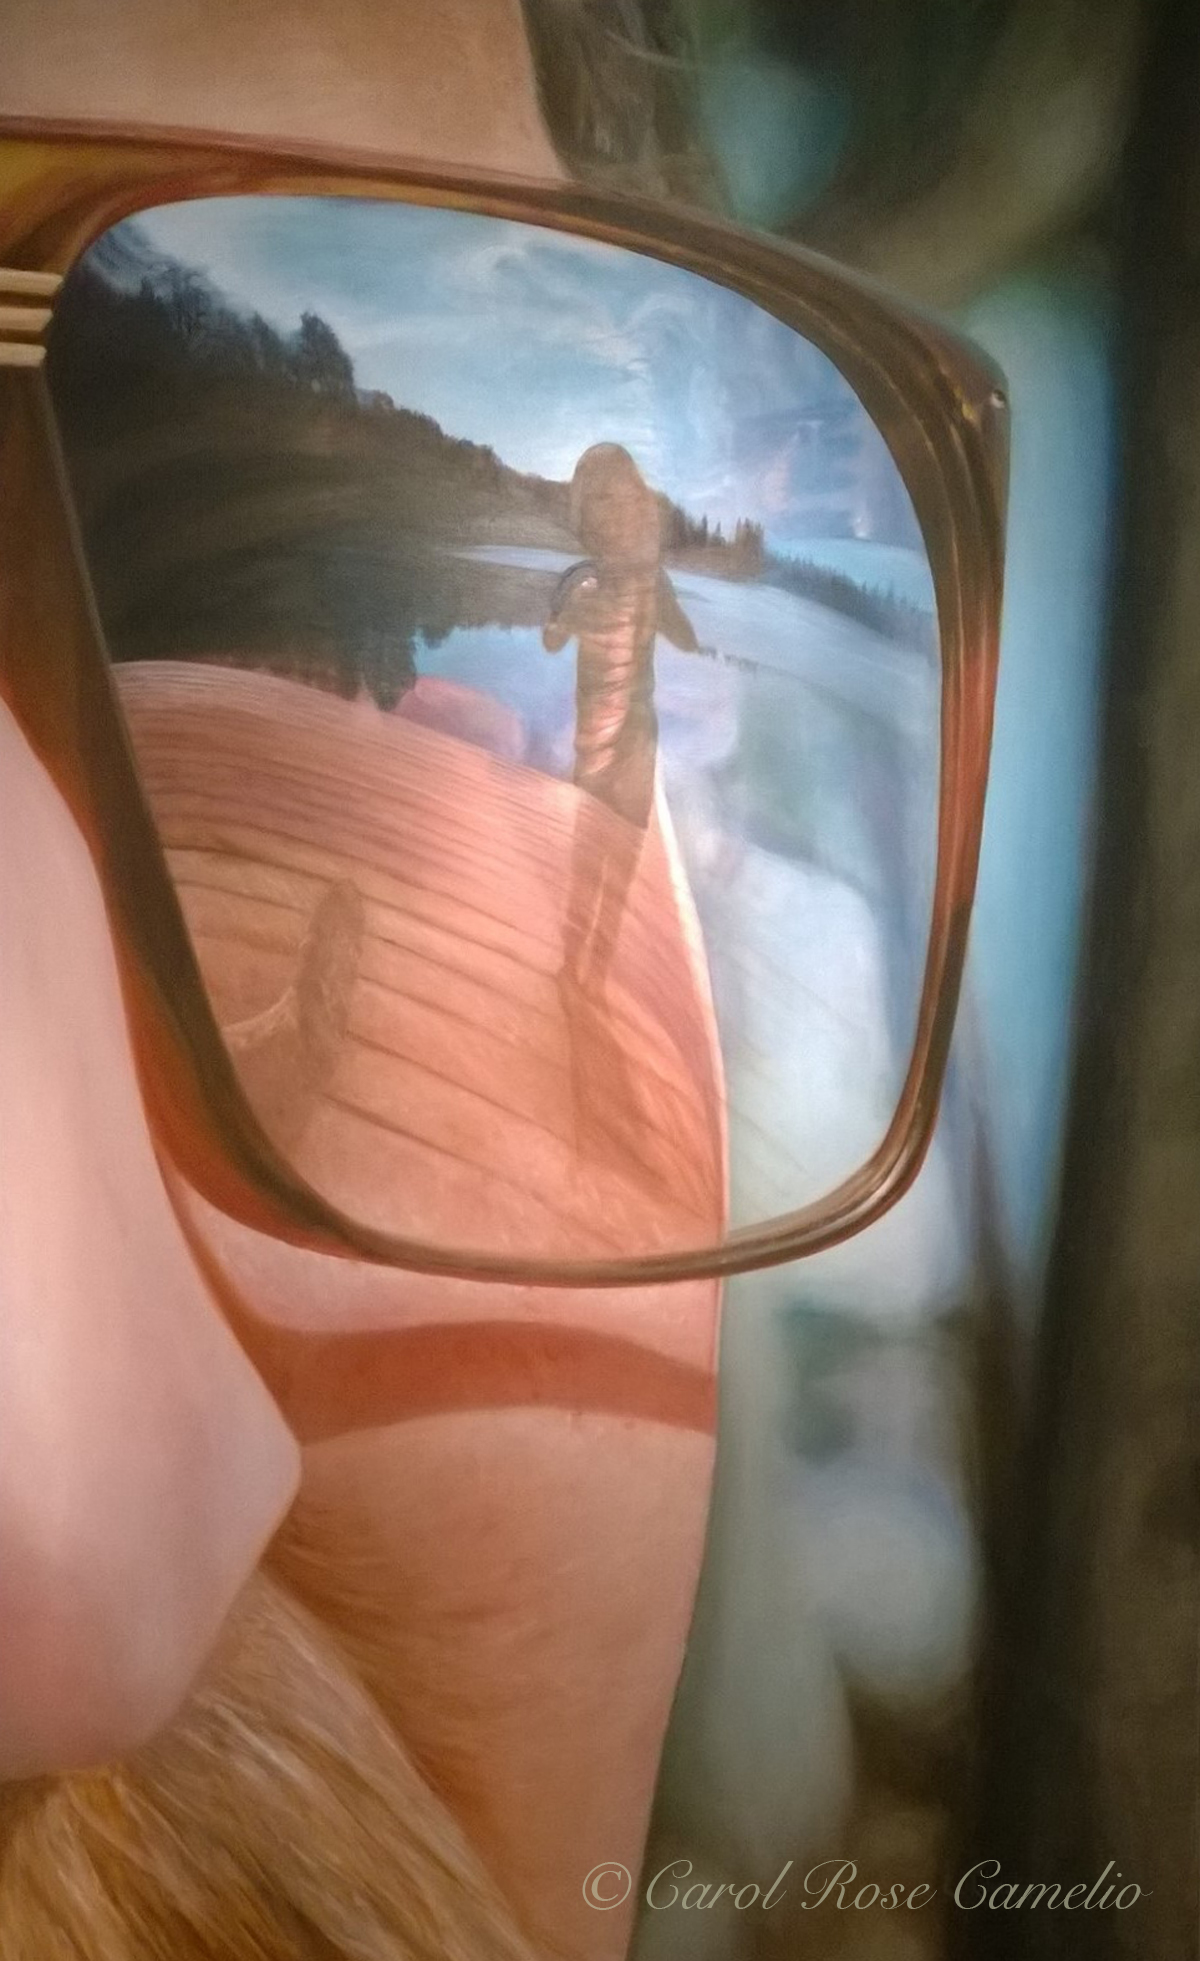 Visionpoint: A closeup of a man's sunglasses, reflecting the image of a small boy on a lakeside dock.